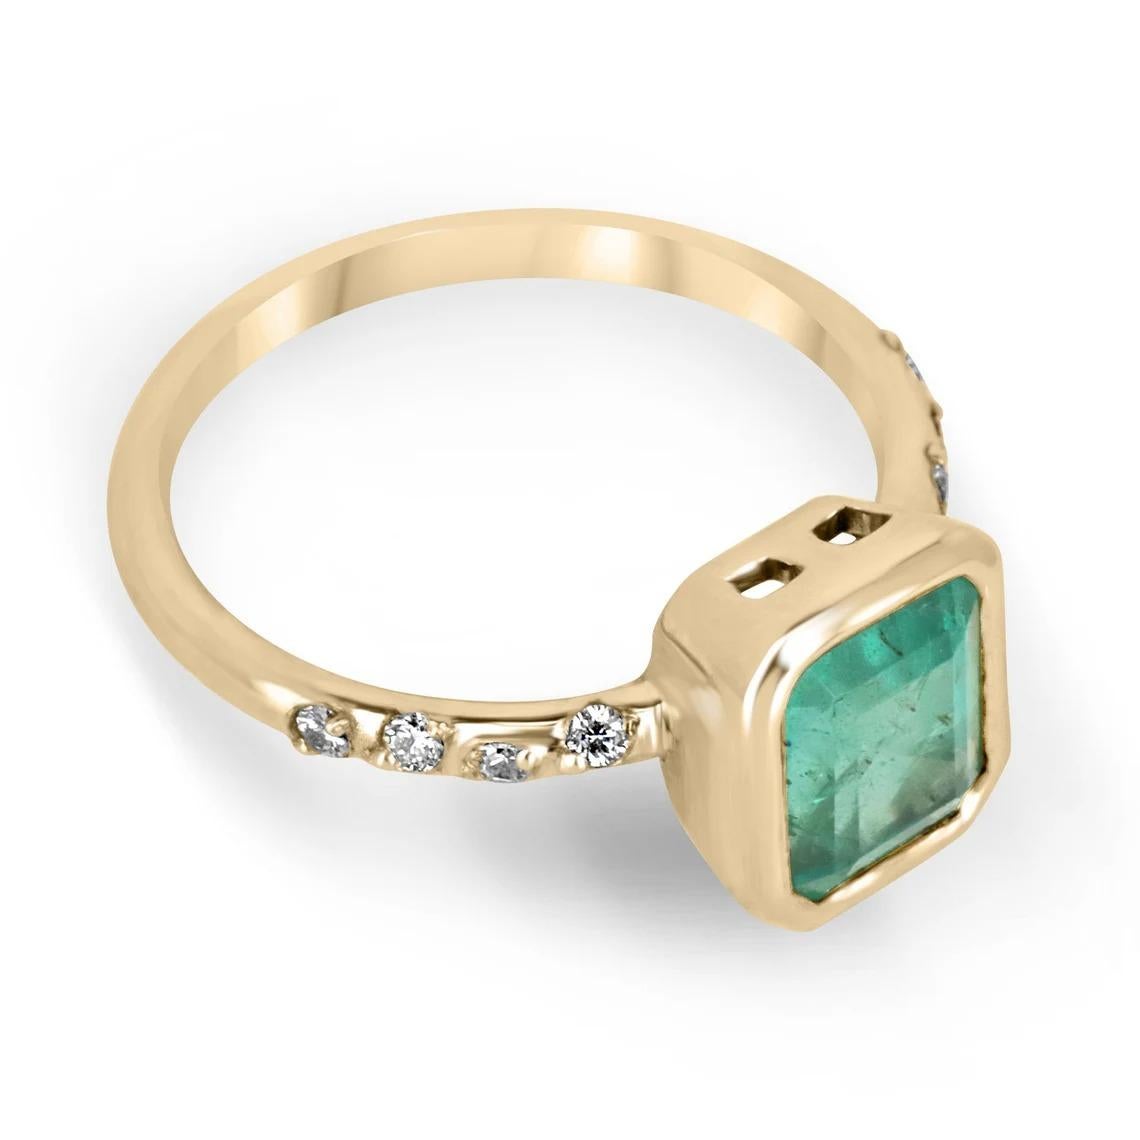 This natural Zambian emerald cut emerald ring is a true statement piece. The emerald is set vertically in a bezel setting, which adds a modern twist to the classic style. The emerald cut allows for the stone's natural beauty and color to be fully